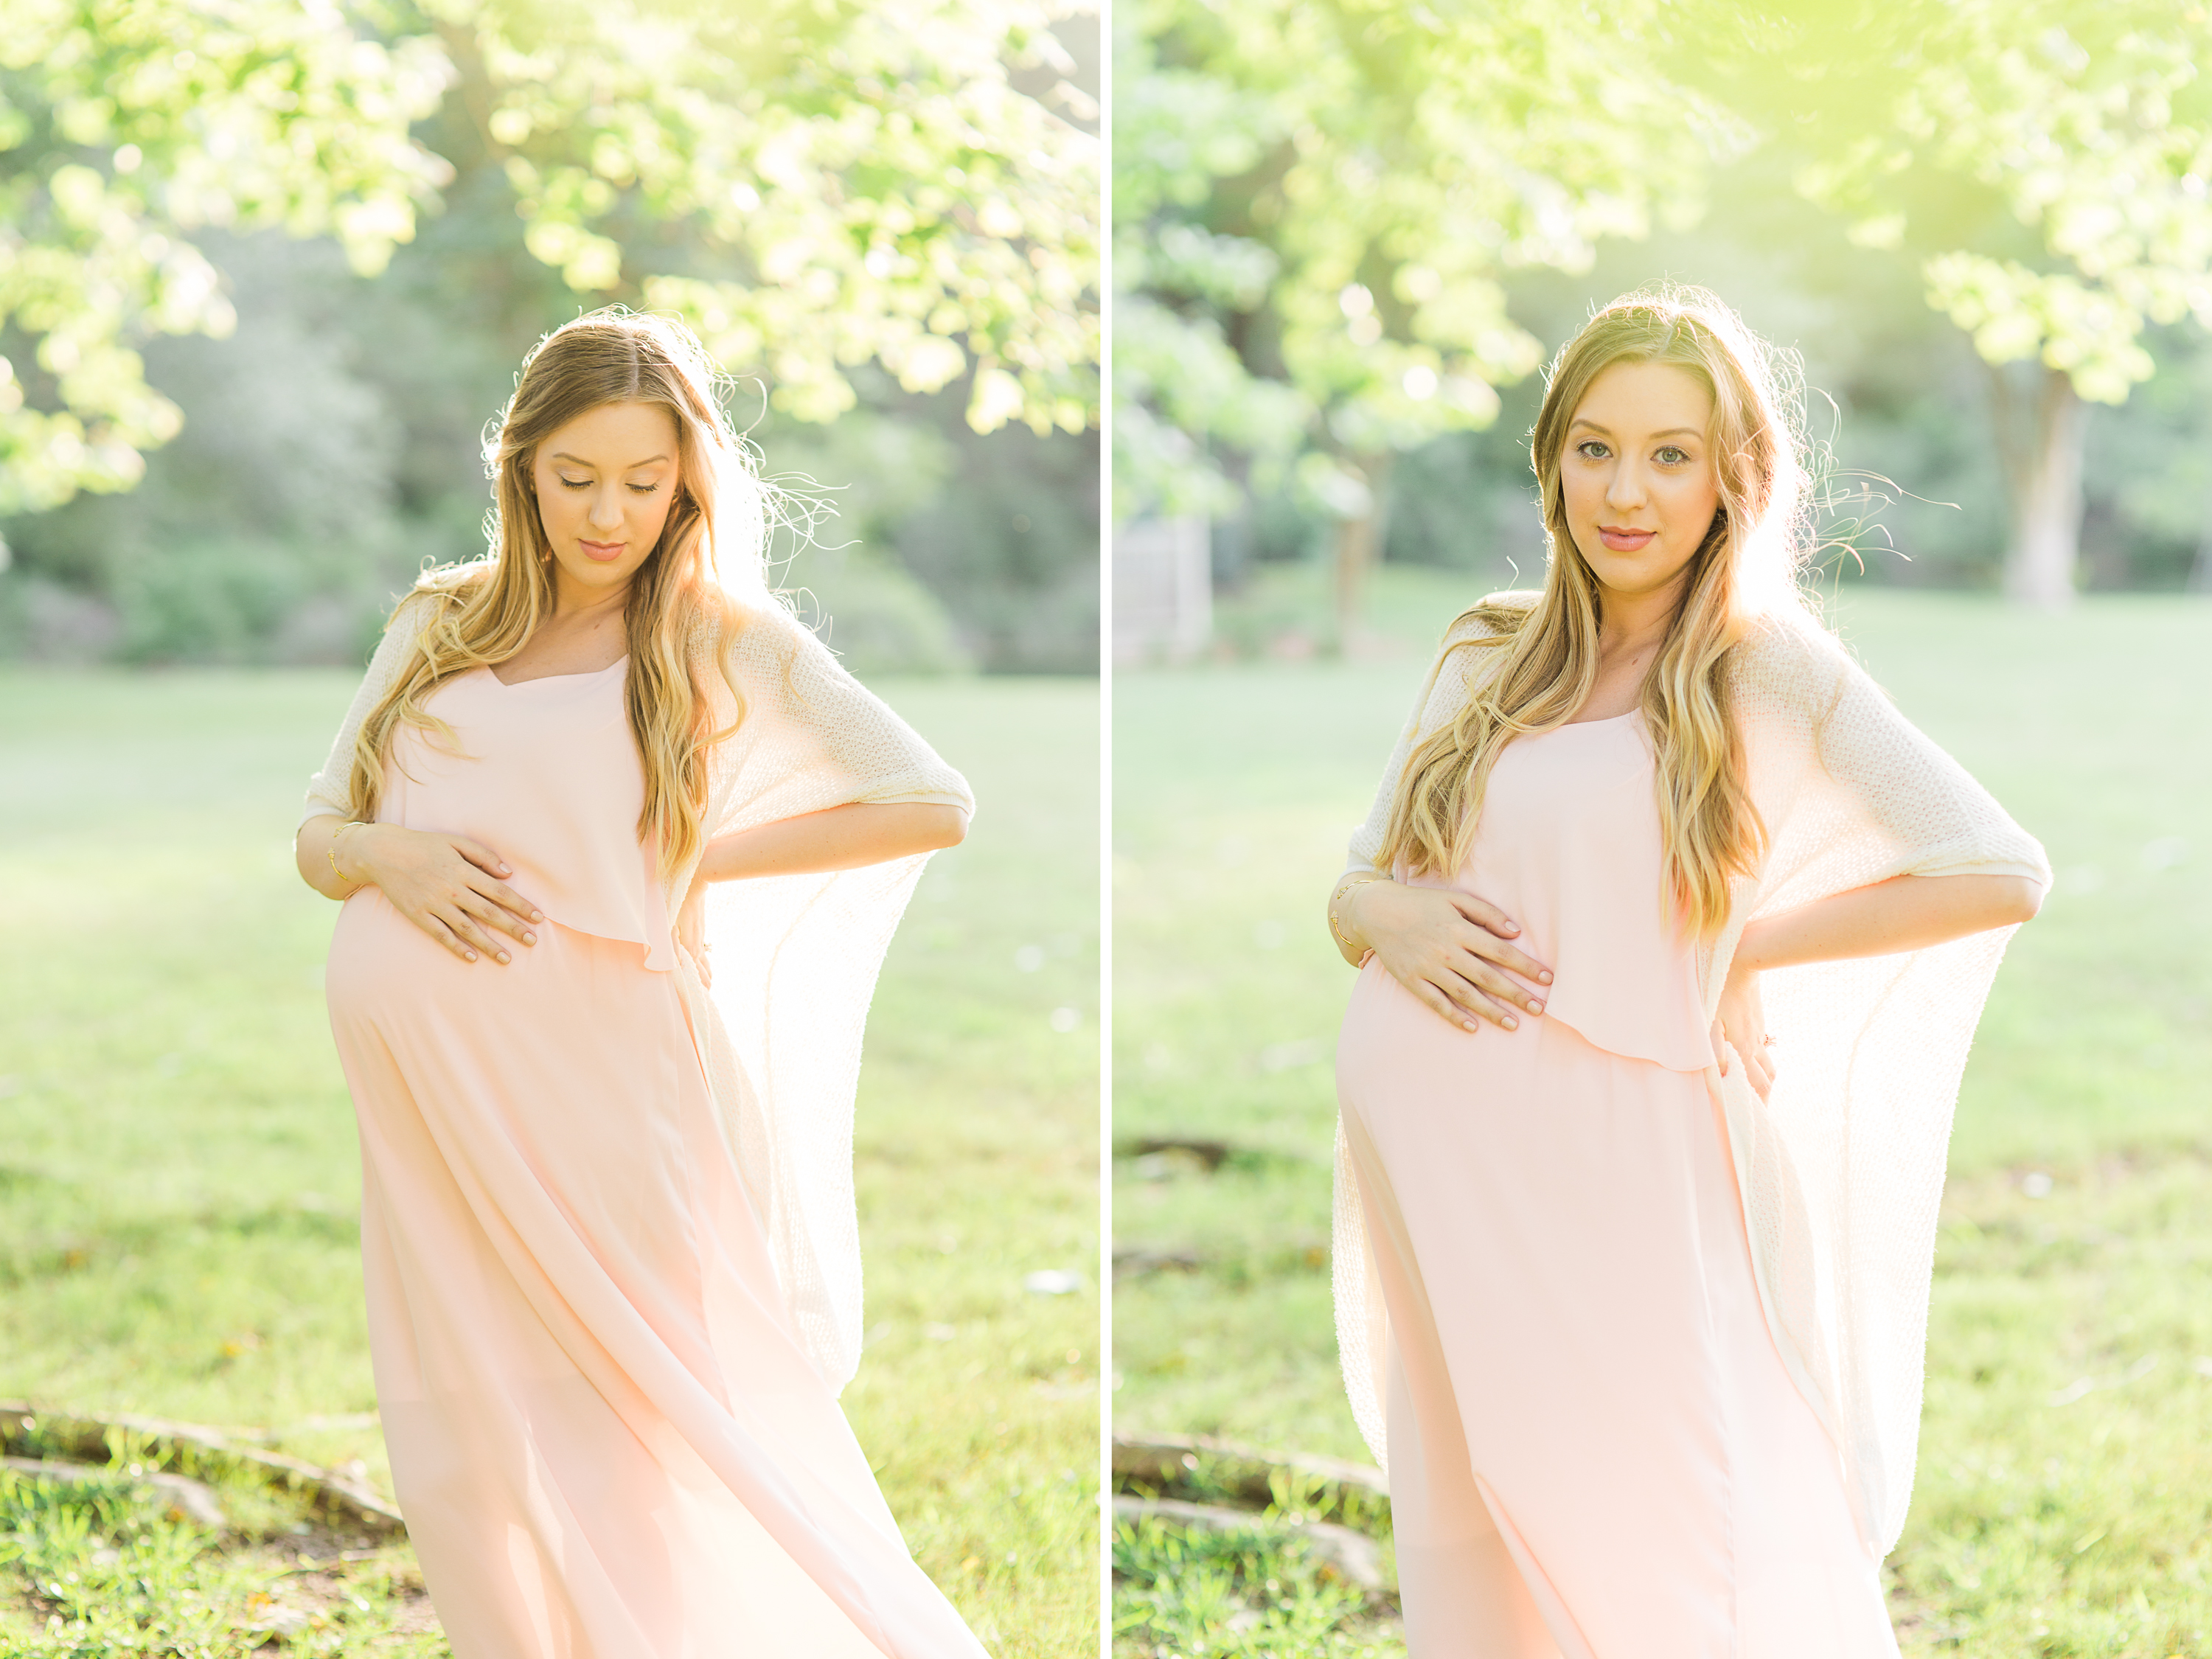 niceville maternity session with dog by lake